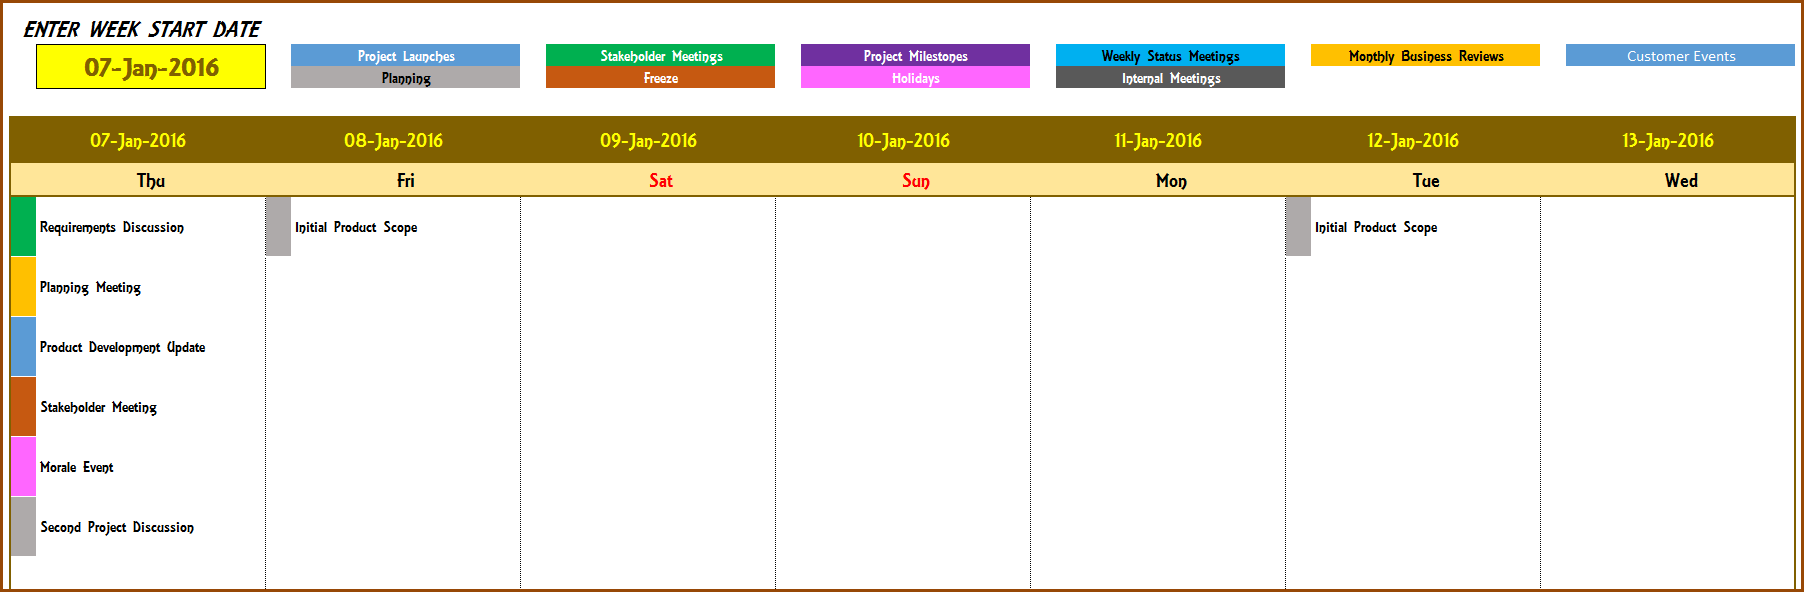 Event Calendar Maker – Excel Template – Weekly with Events Design